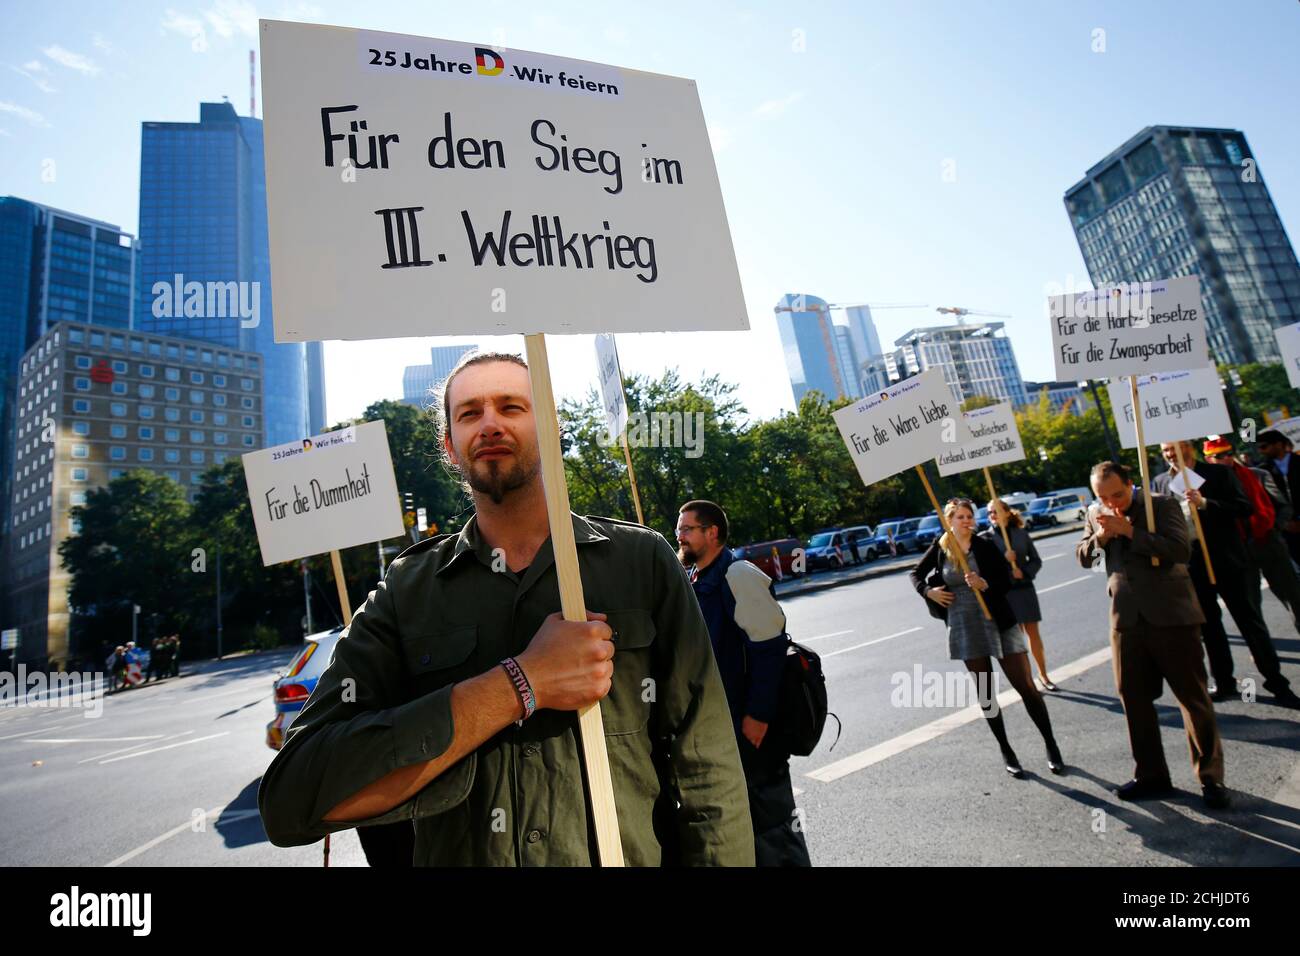 People take part in a protest in Frankfurt, Germany, October 3, 2015, as Germany's political leaders celebrate the country's 25th anniversary since the reunification of East and West Germany. The texts read 'For the stupidity', 'For the victory in World War Three', 'For real love'.   REUTERS/Kai Pfaffenbach Stock Photo